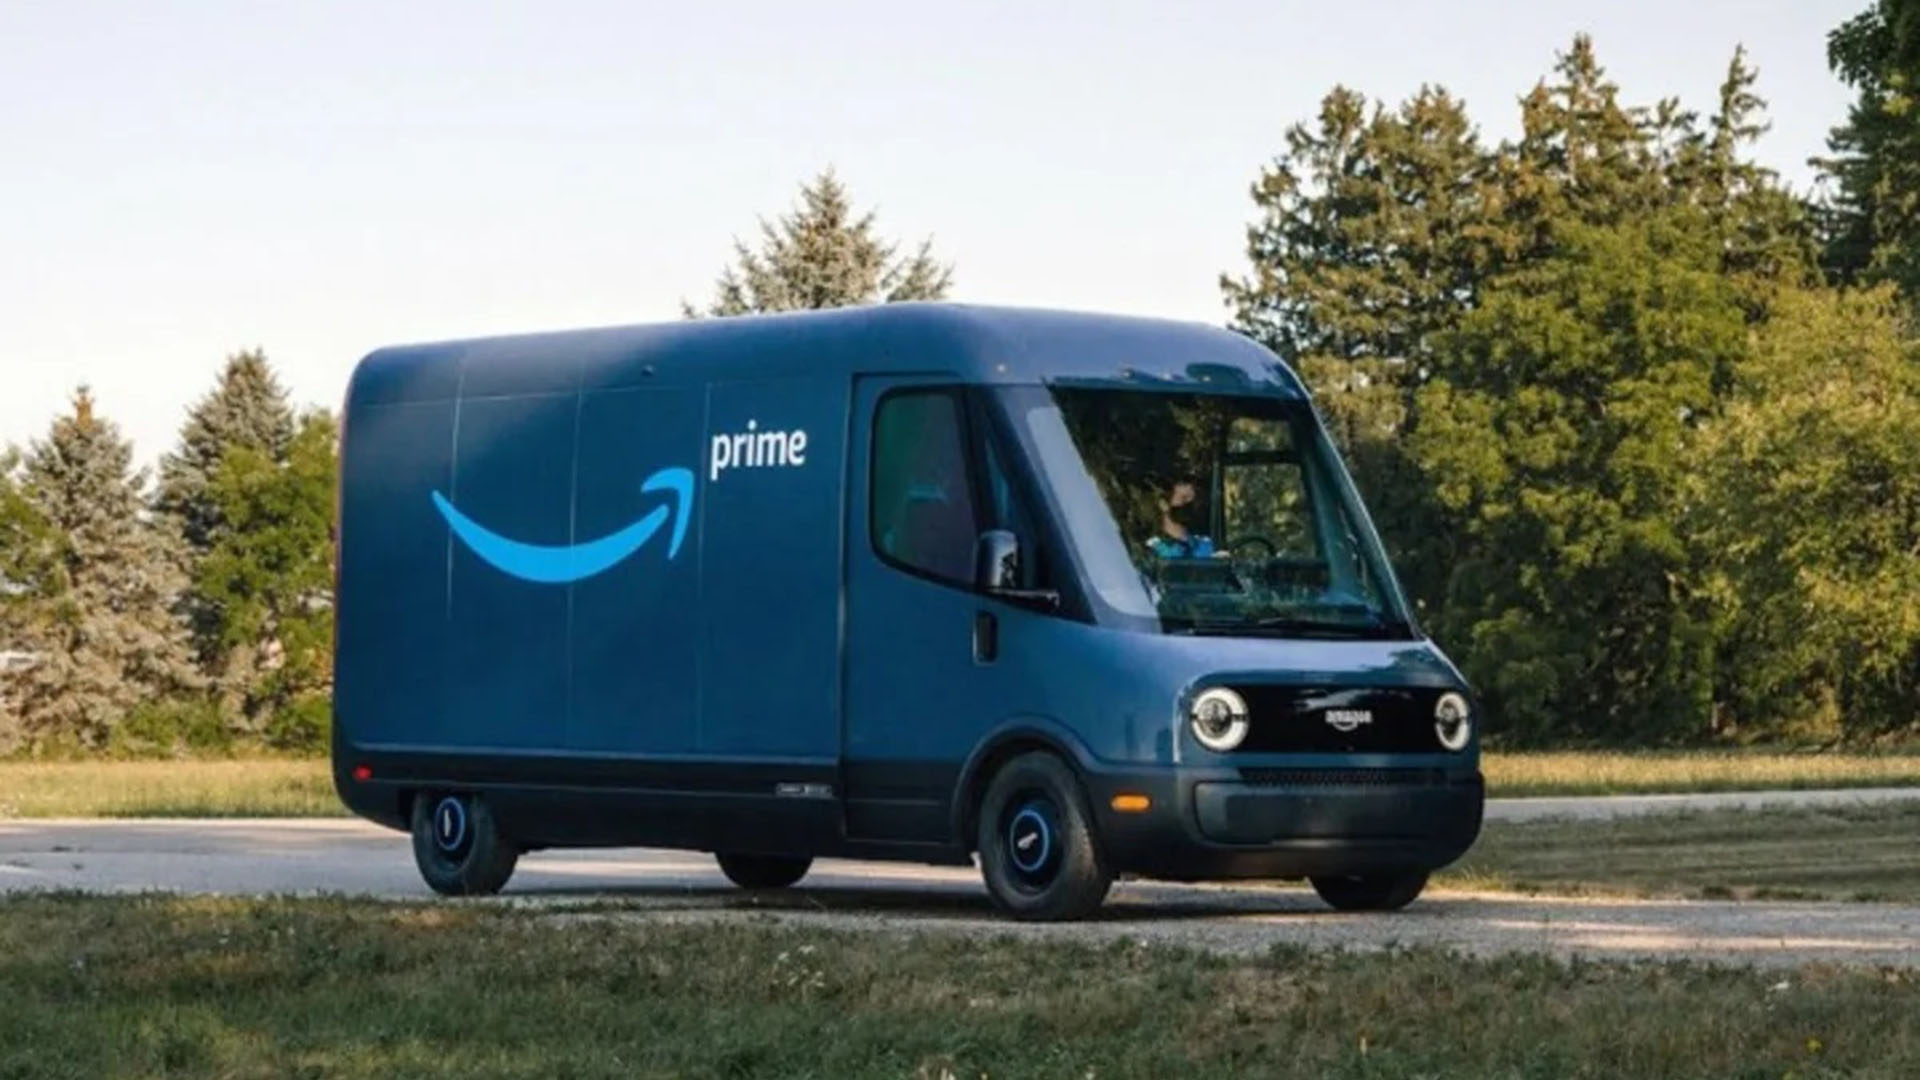 Rivian secured funding from Jeff Bezos and Amazon by selling him a massive fleet of electric delivery trucks